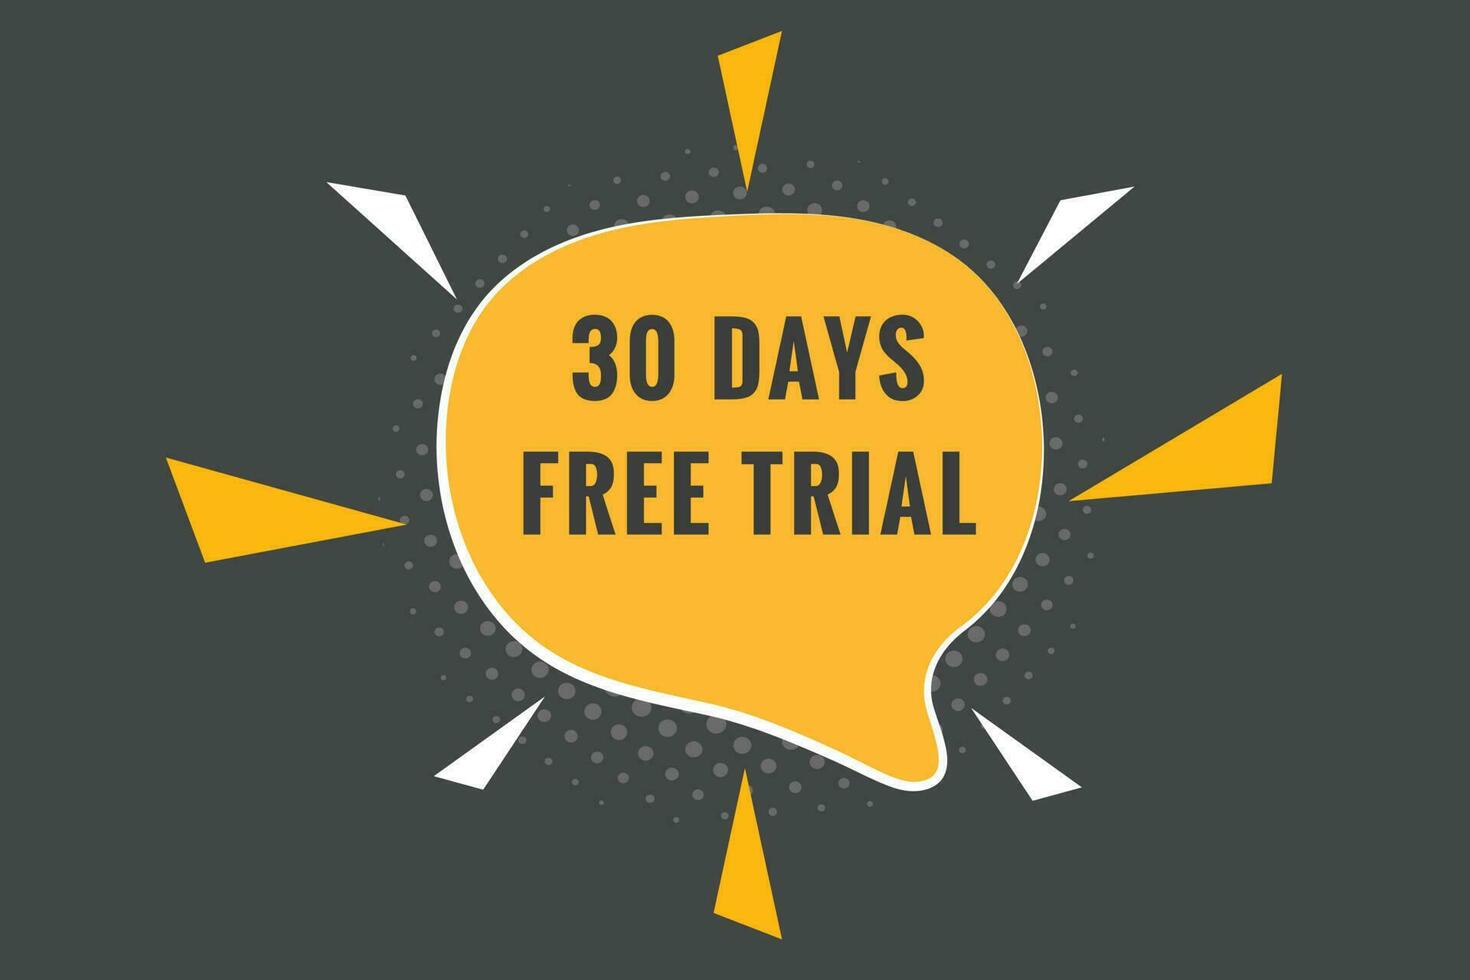 30 days Free trial Banner Design. 30 day free banner background vector